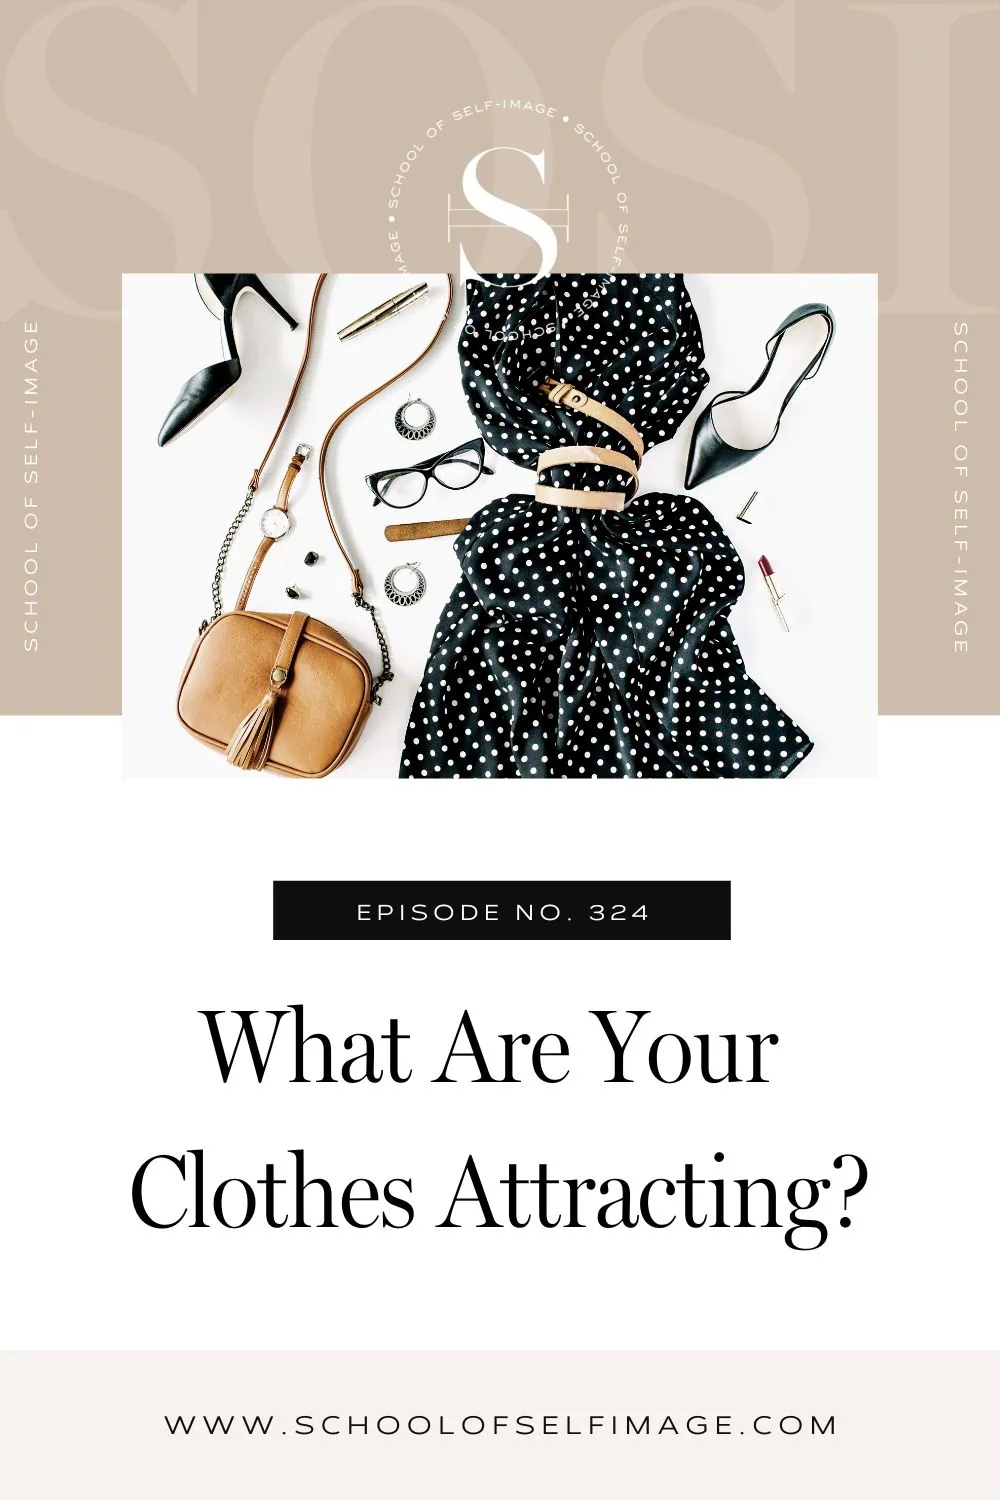 What Are Your Clothes Attracting?